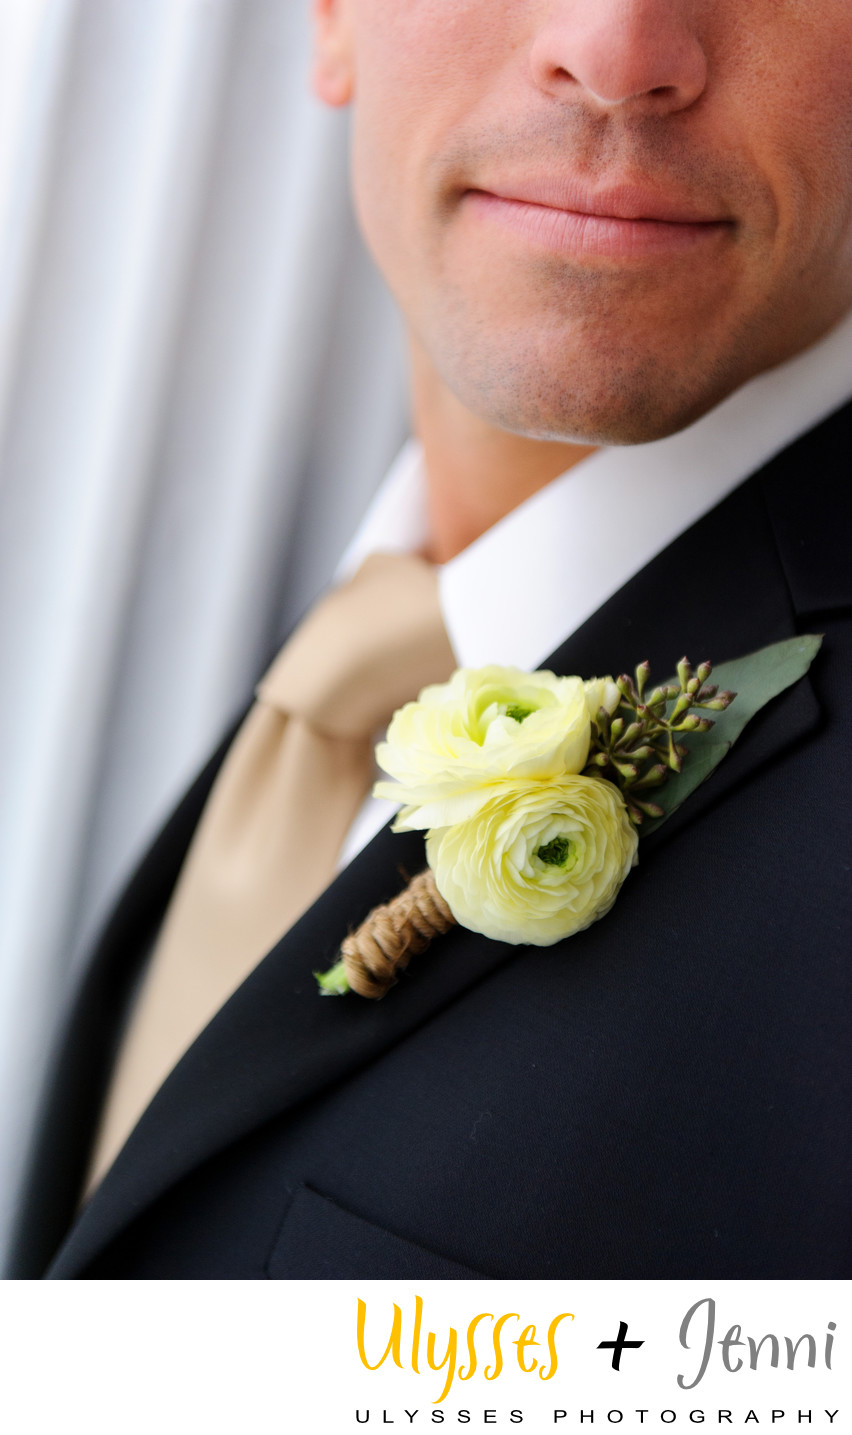 Best Boutonniere for the Groom